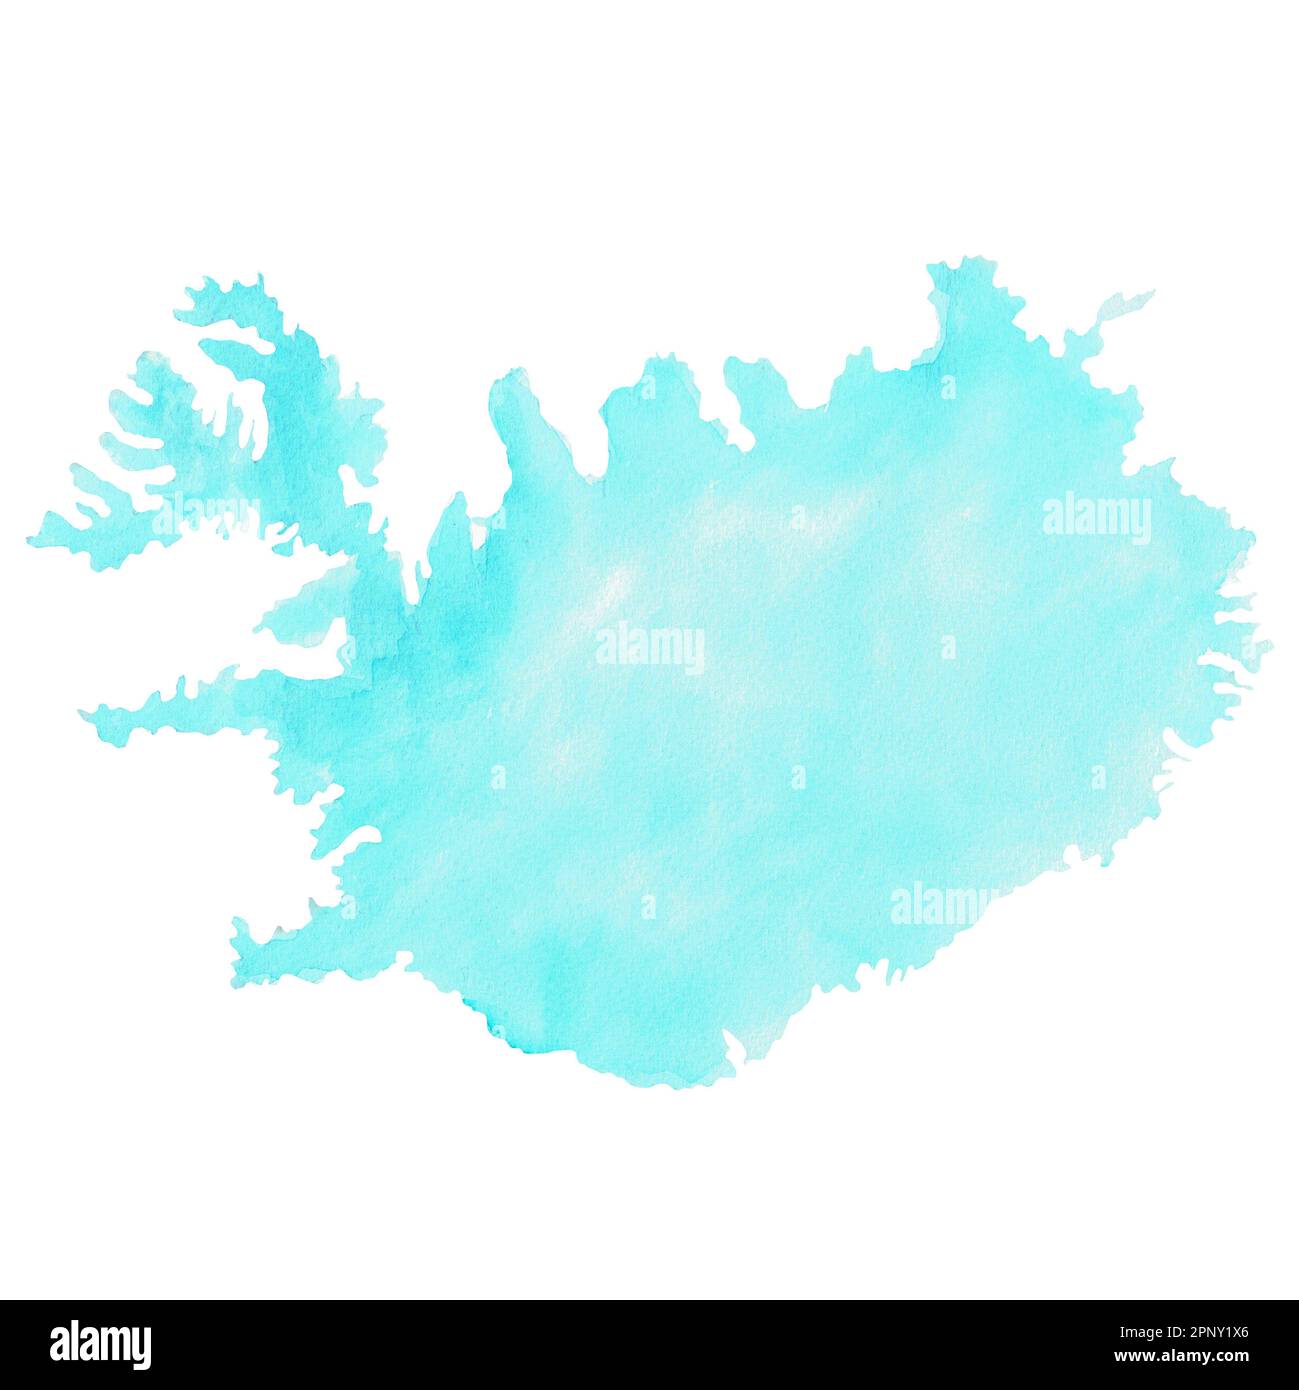 Hand drawn watercolor illustration of Iceland map. Isolated on white. For printing design, etc. A part of the big ICELANDIC set of illustrations Stock Photo